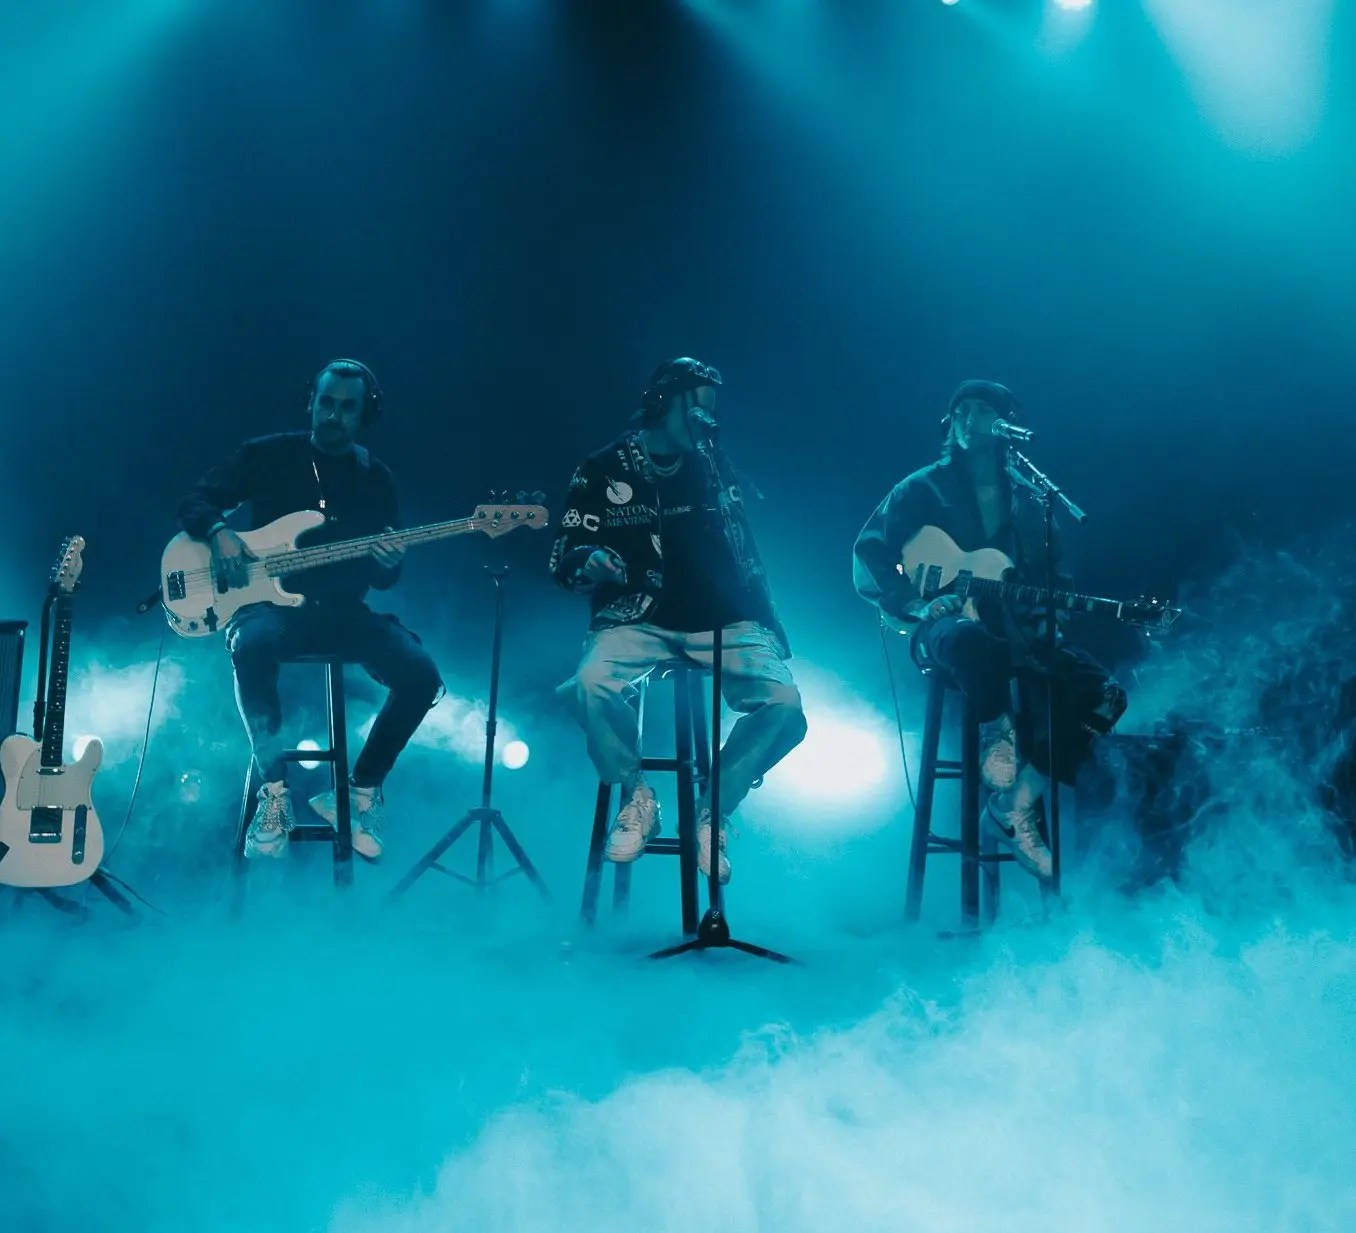 A Group Of People On Stage With Guitars And Smoke Wallpaper